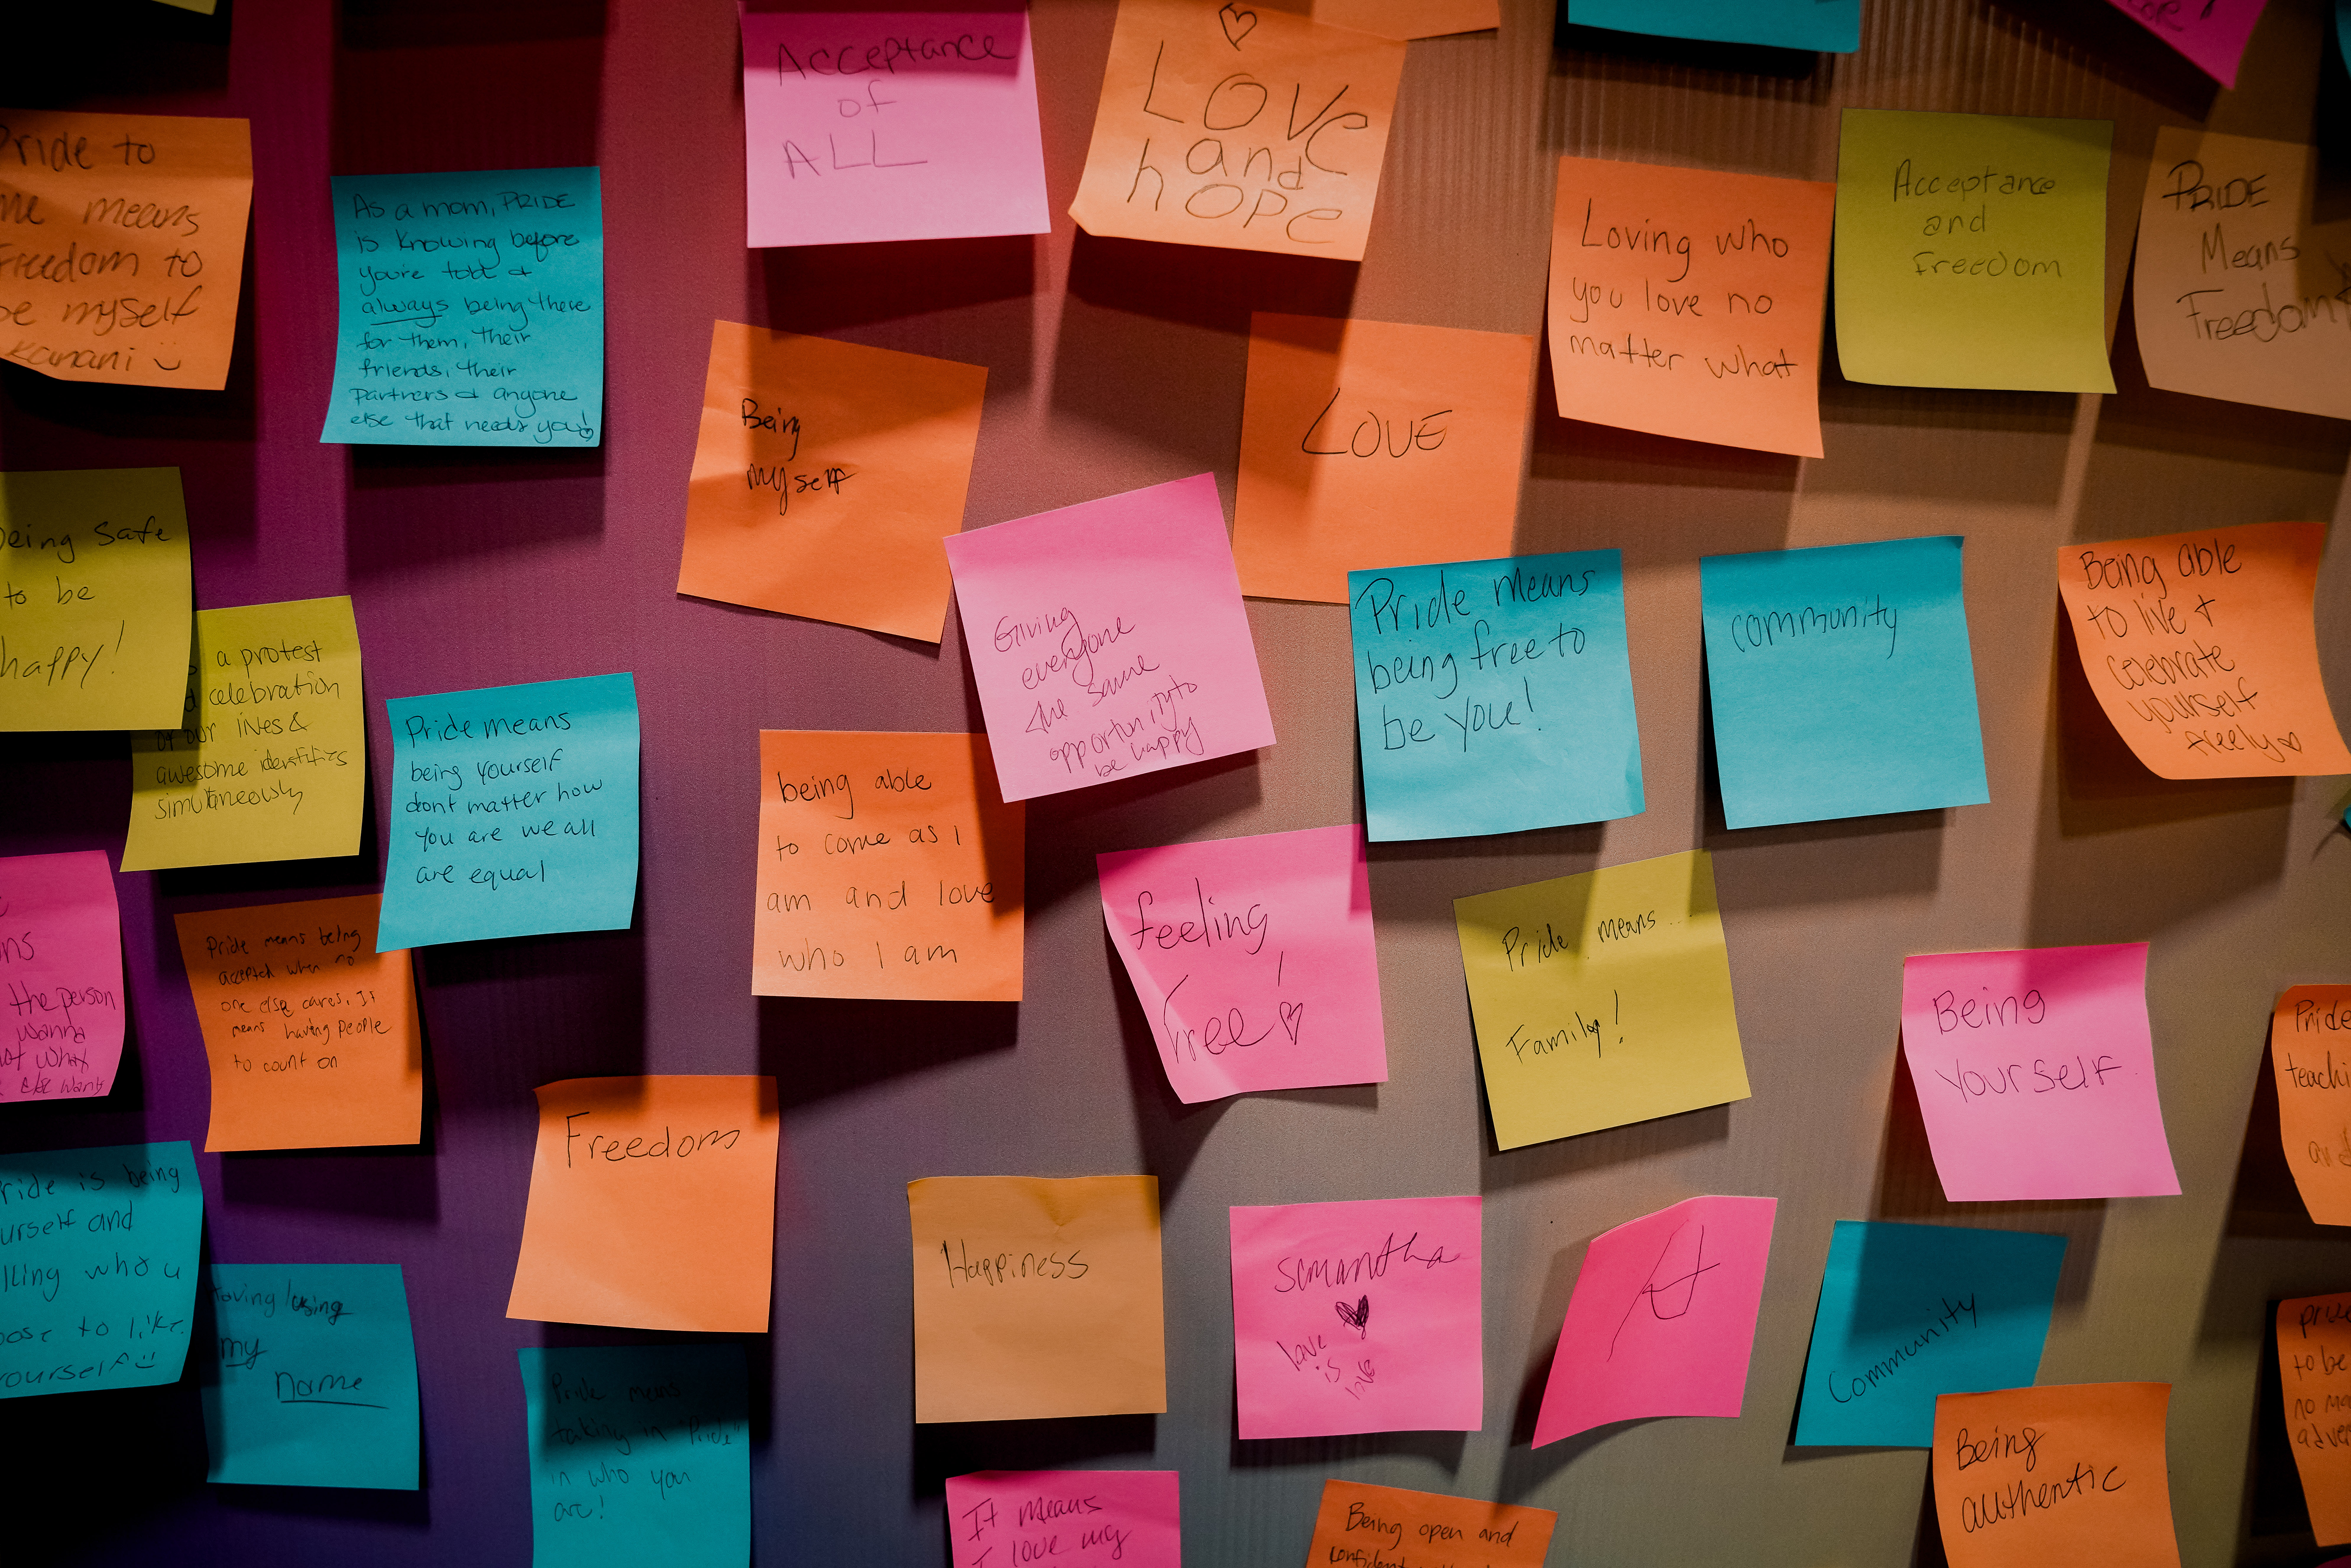 A wall of post-it notes